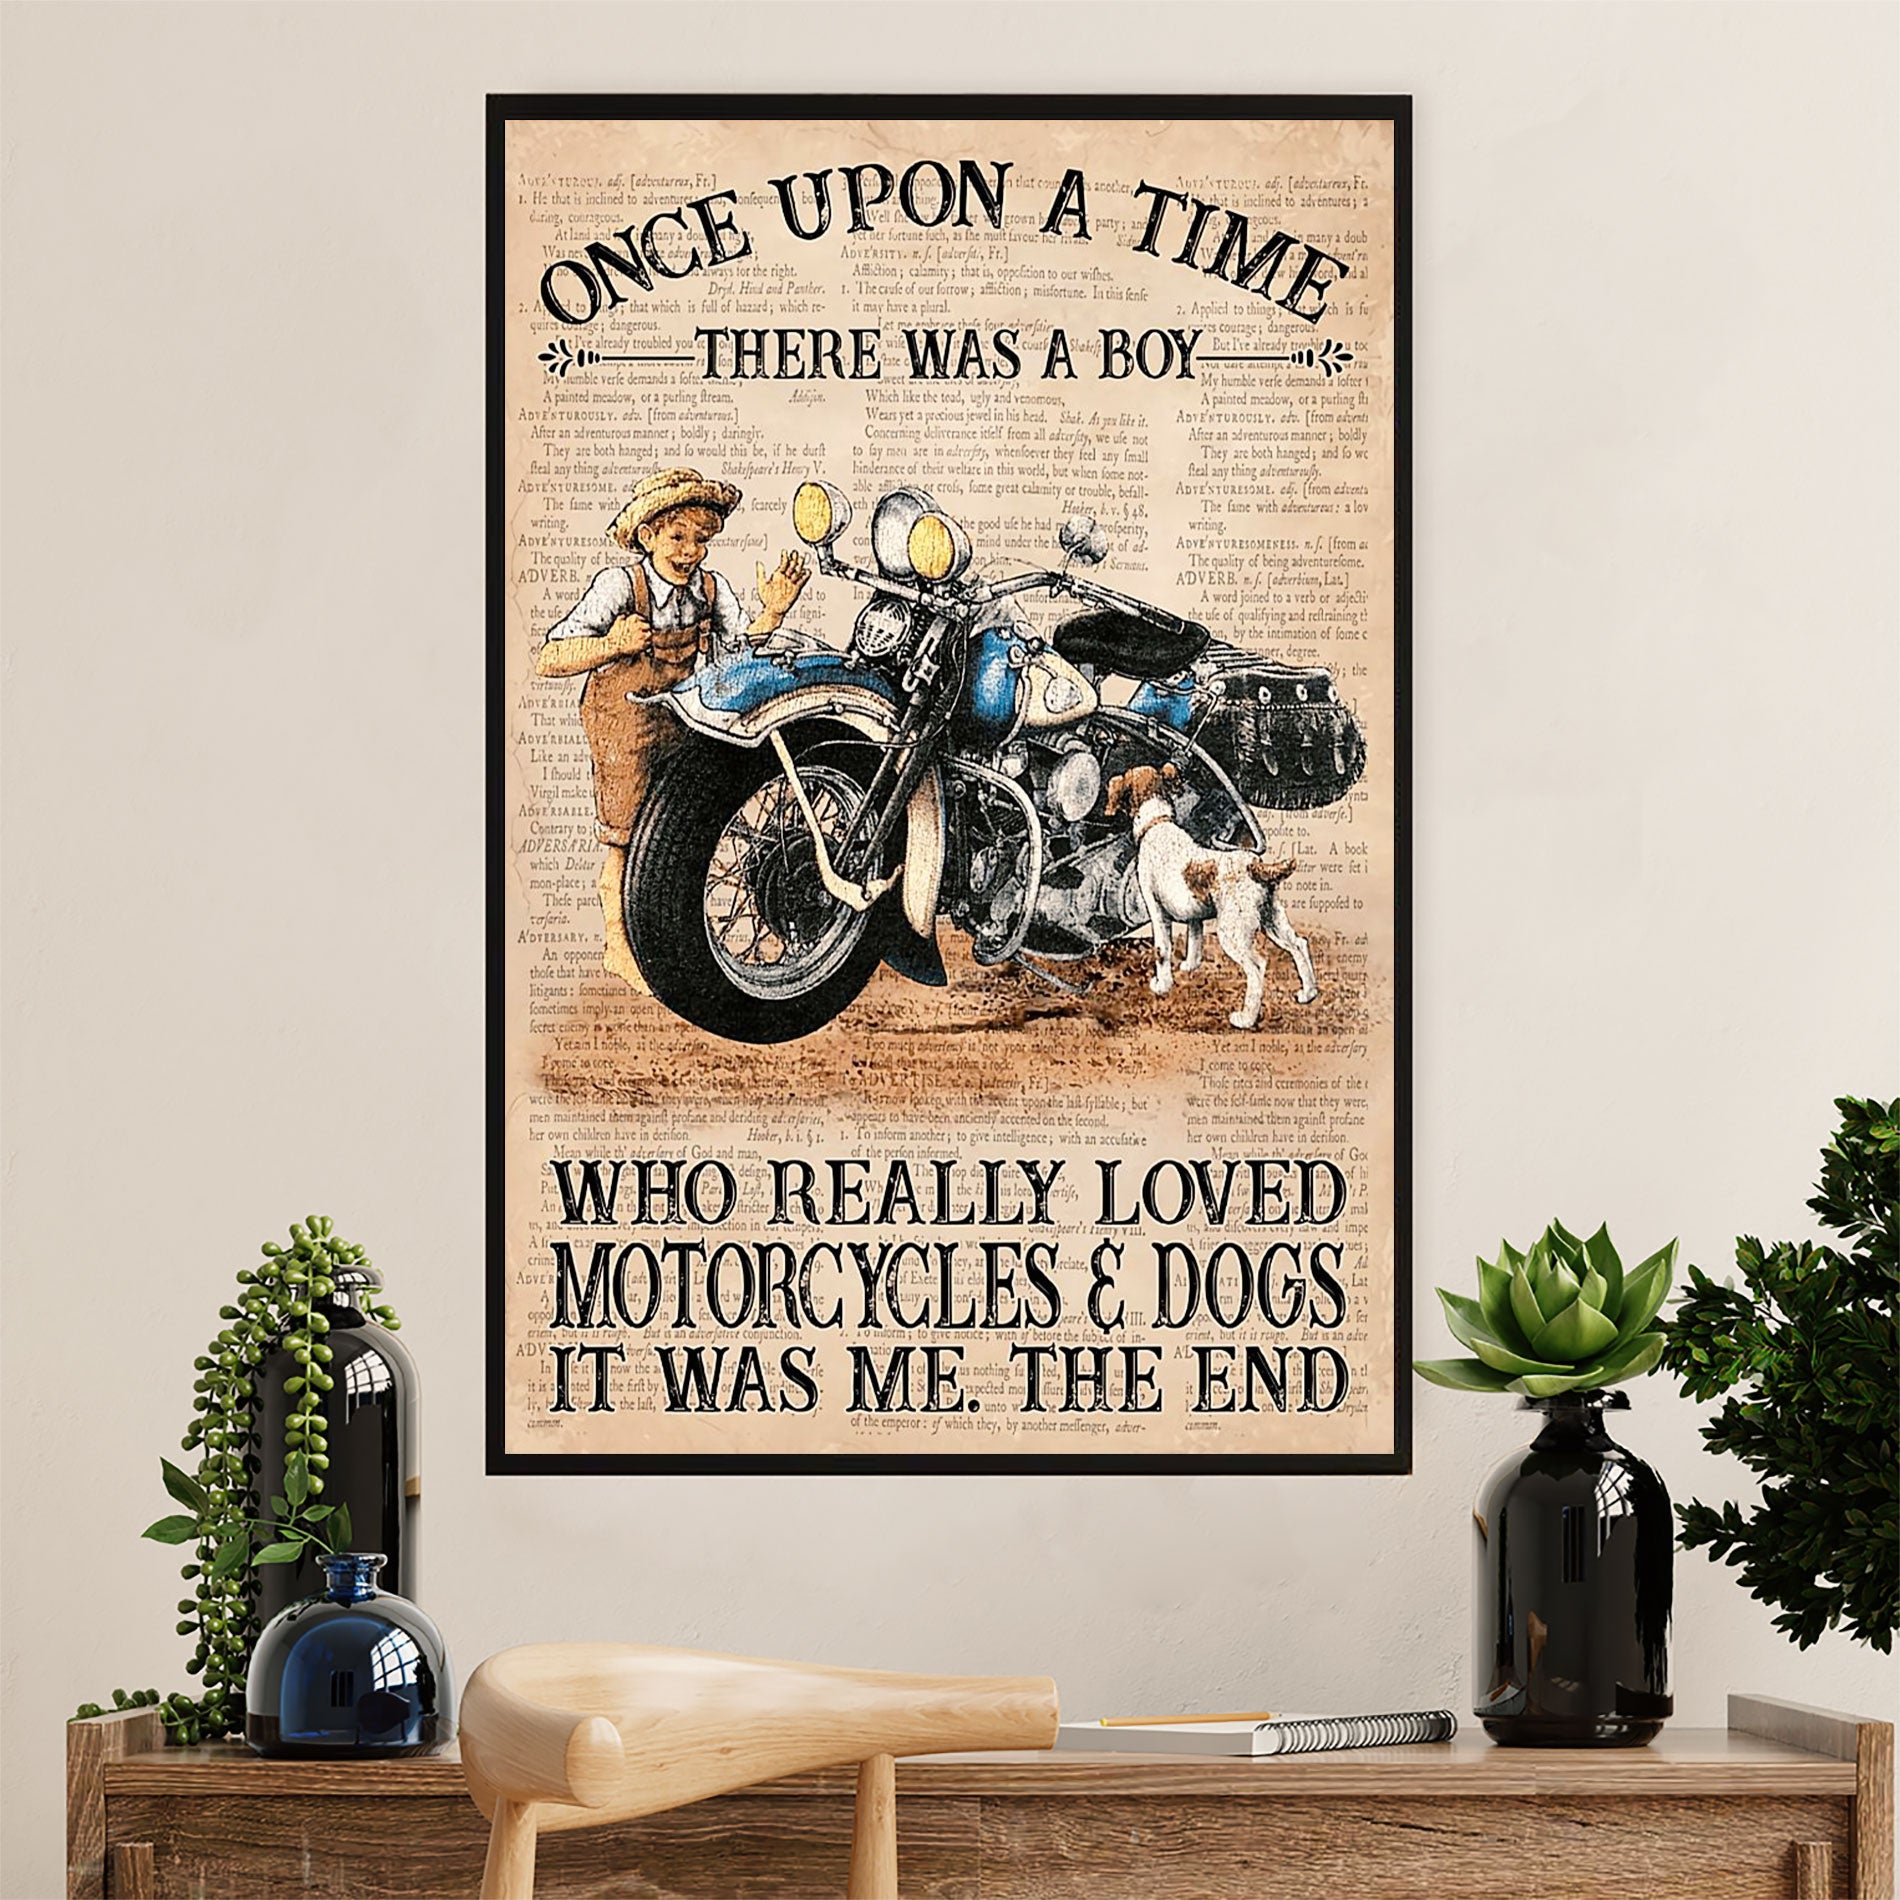 Motorcycle Posters & Wall Art Prints